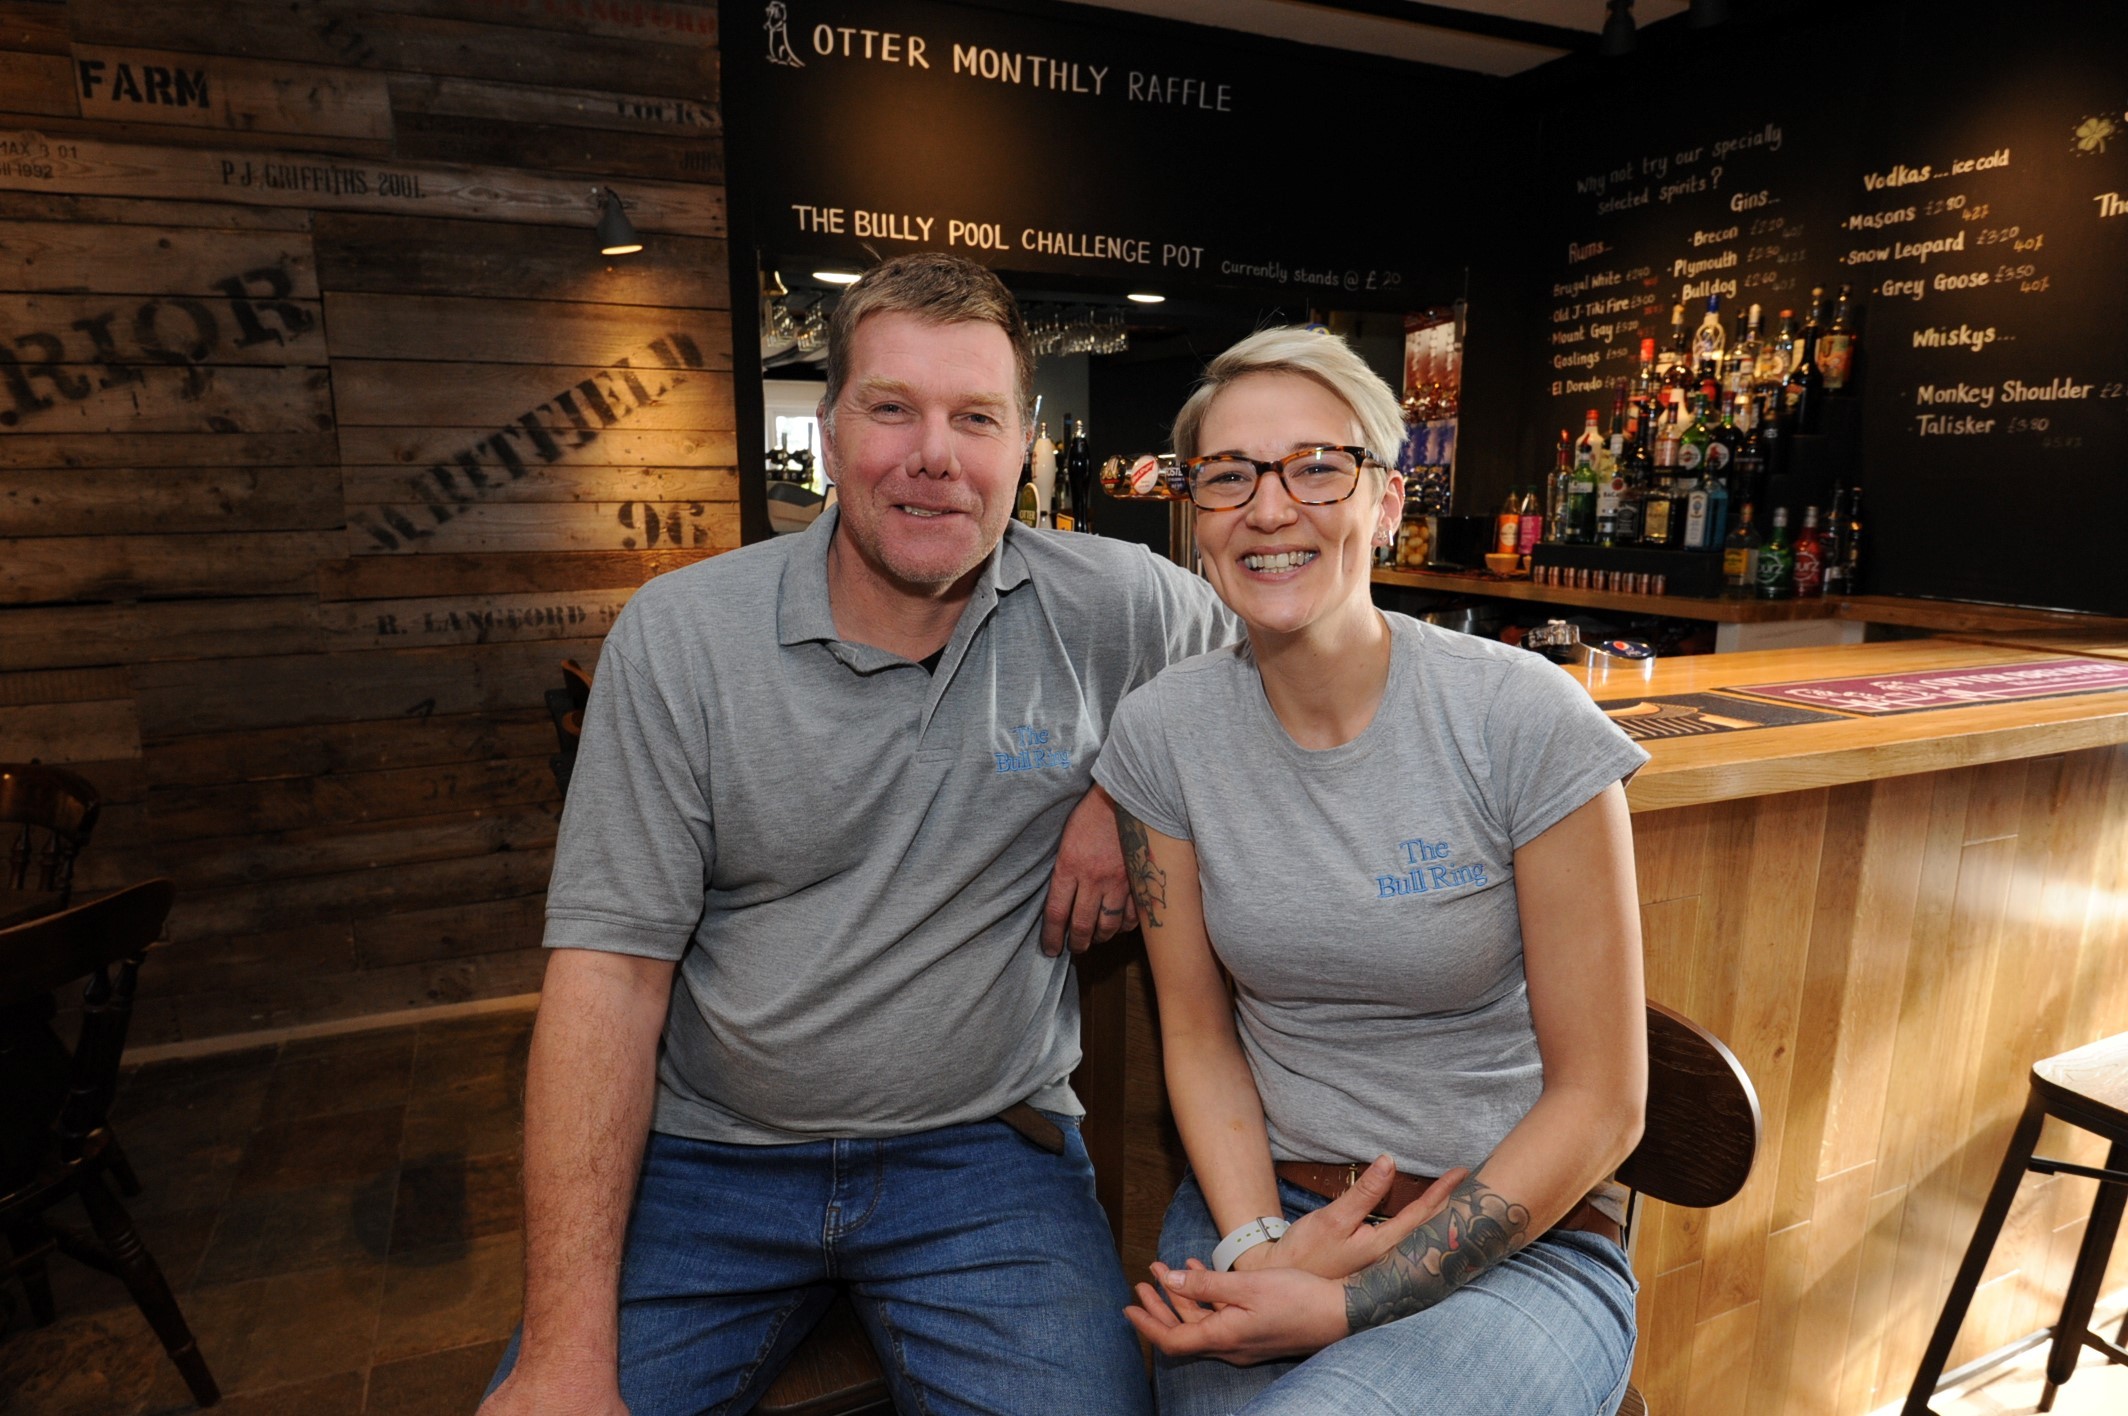 Couple who have taken over village pub want to 'bring community together'